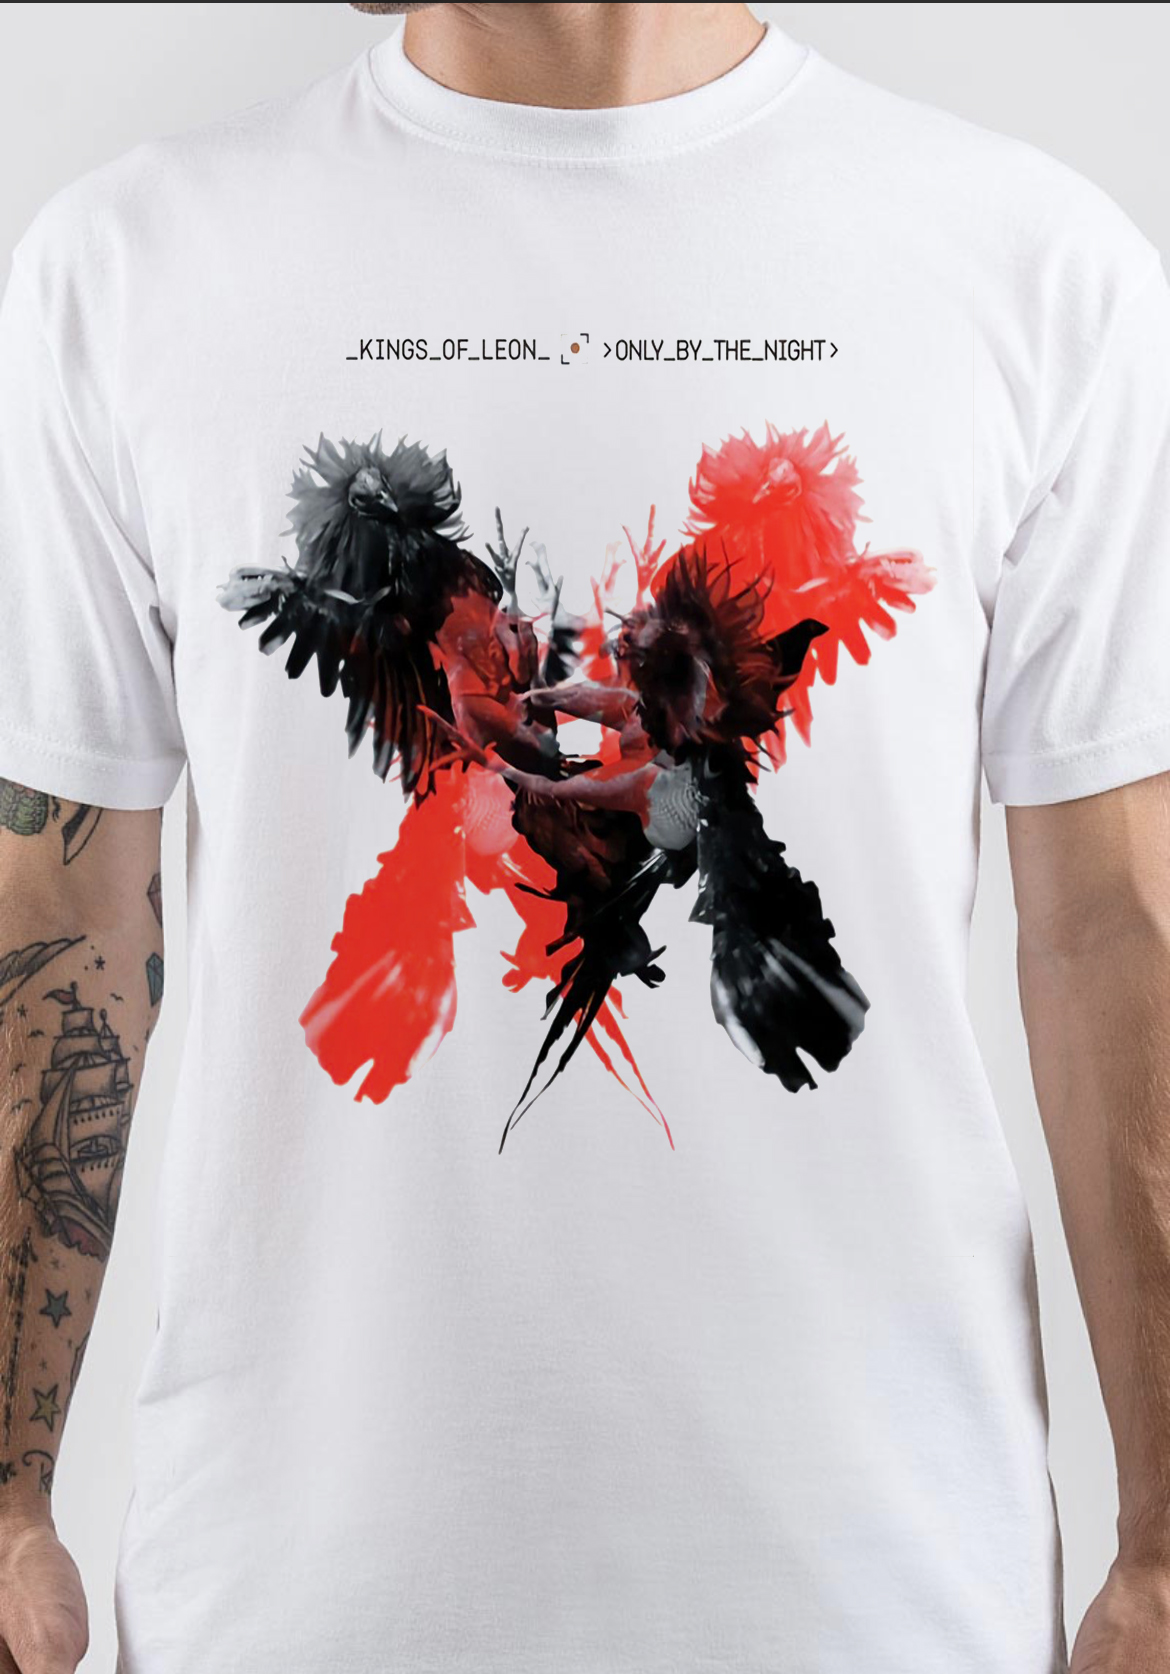 Kings Of Leon T-Shirt And Merchandise